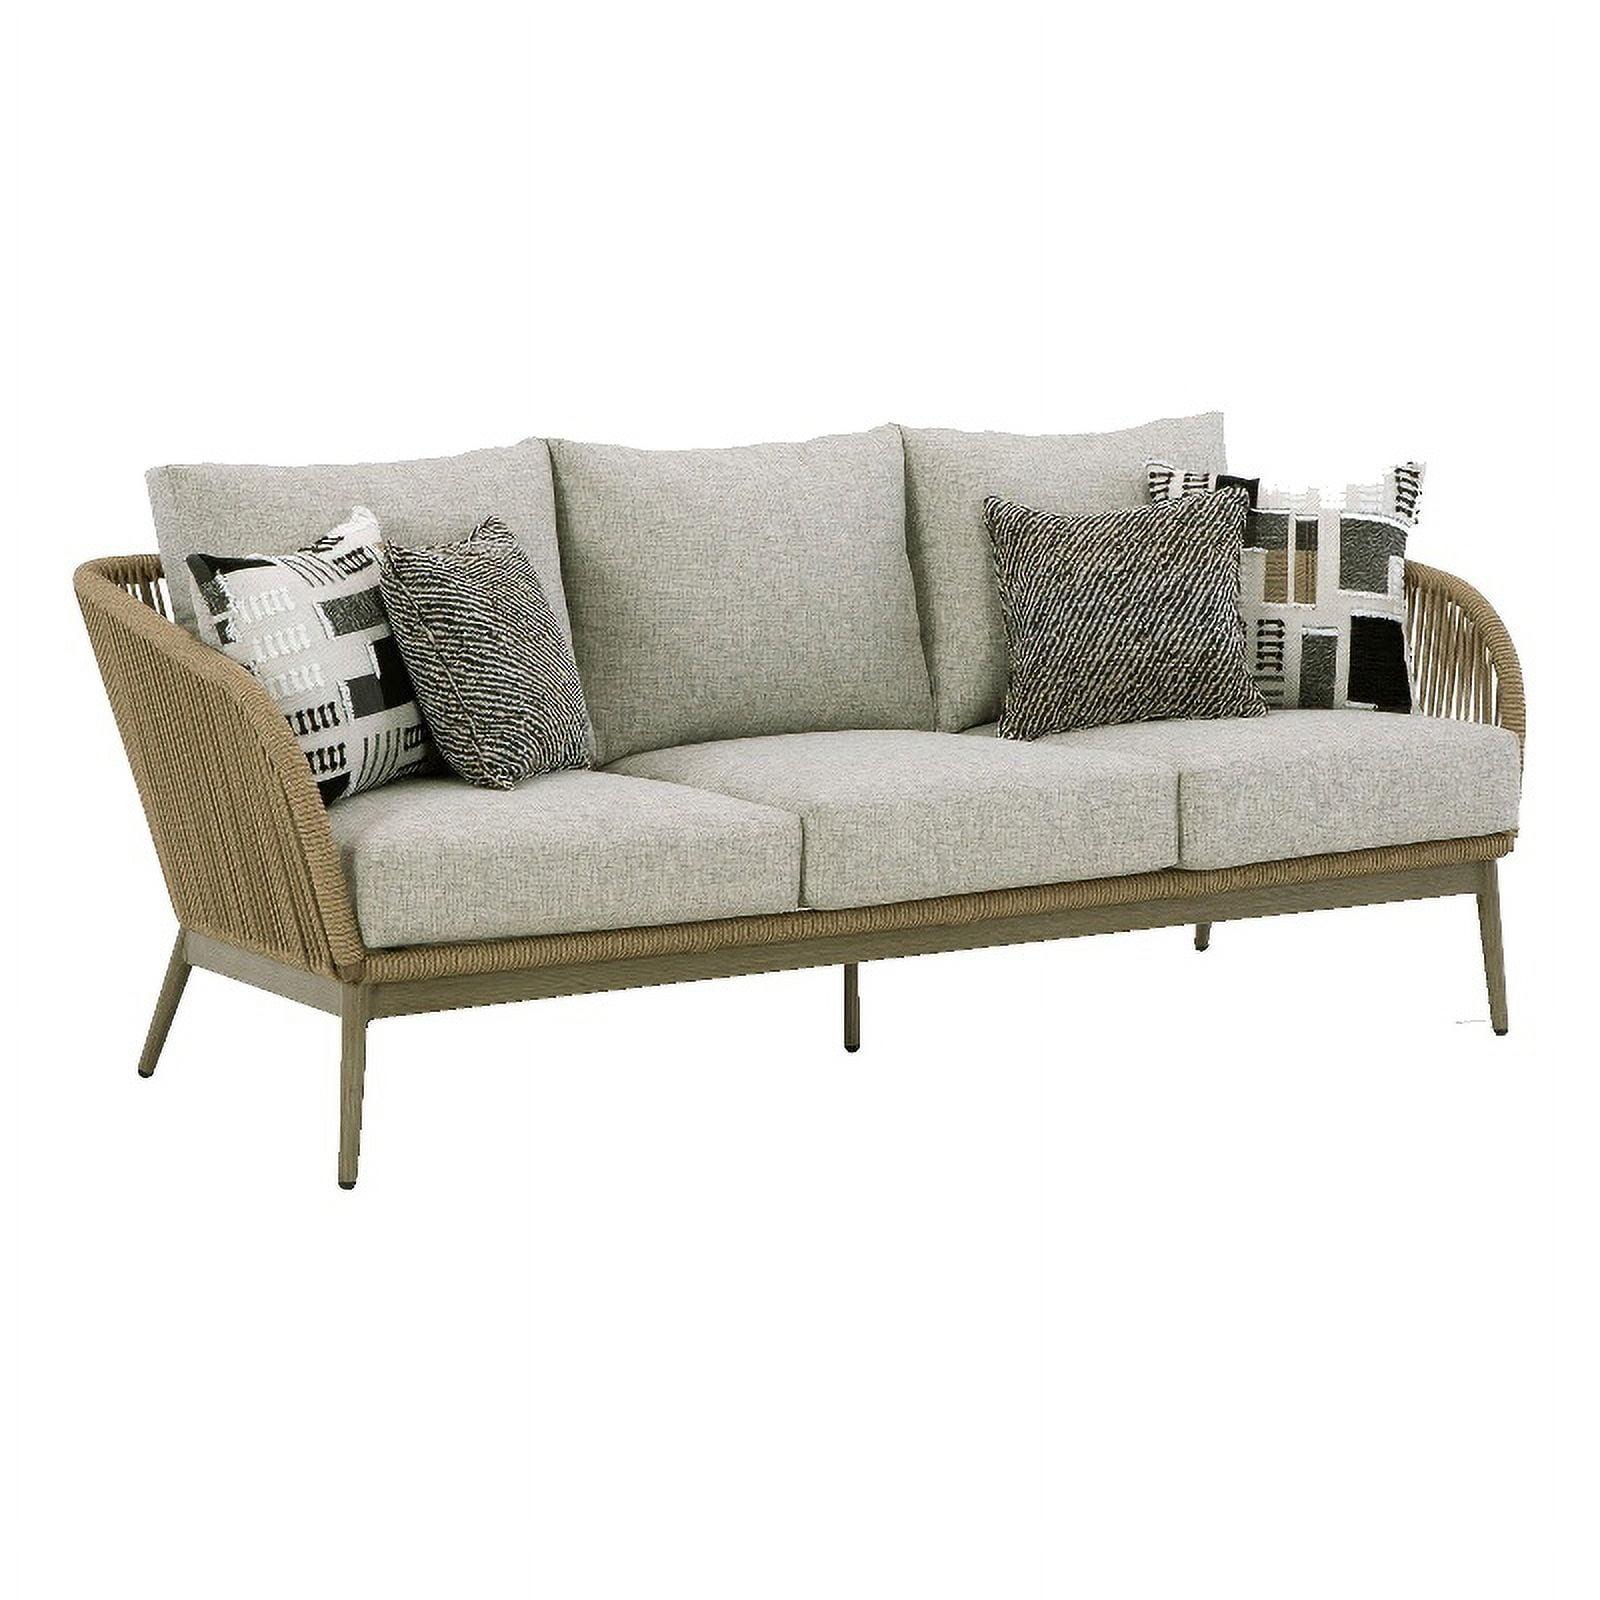 Swiss Valley Transitional 76'' Beige and Gray Wicker Outdoor Sofa